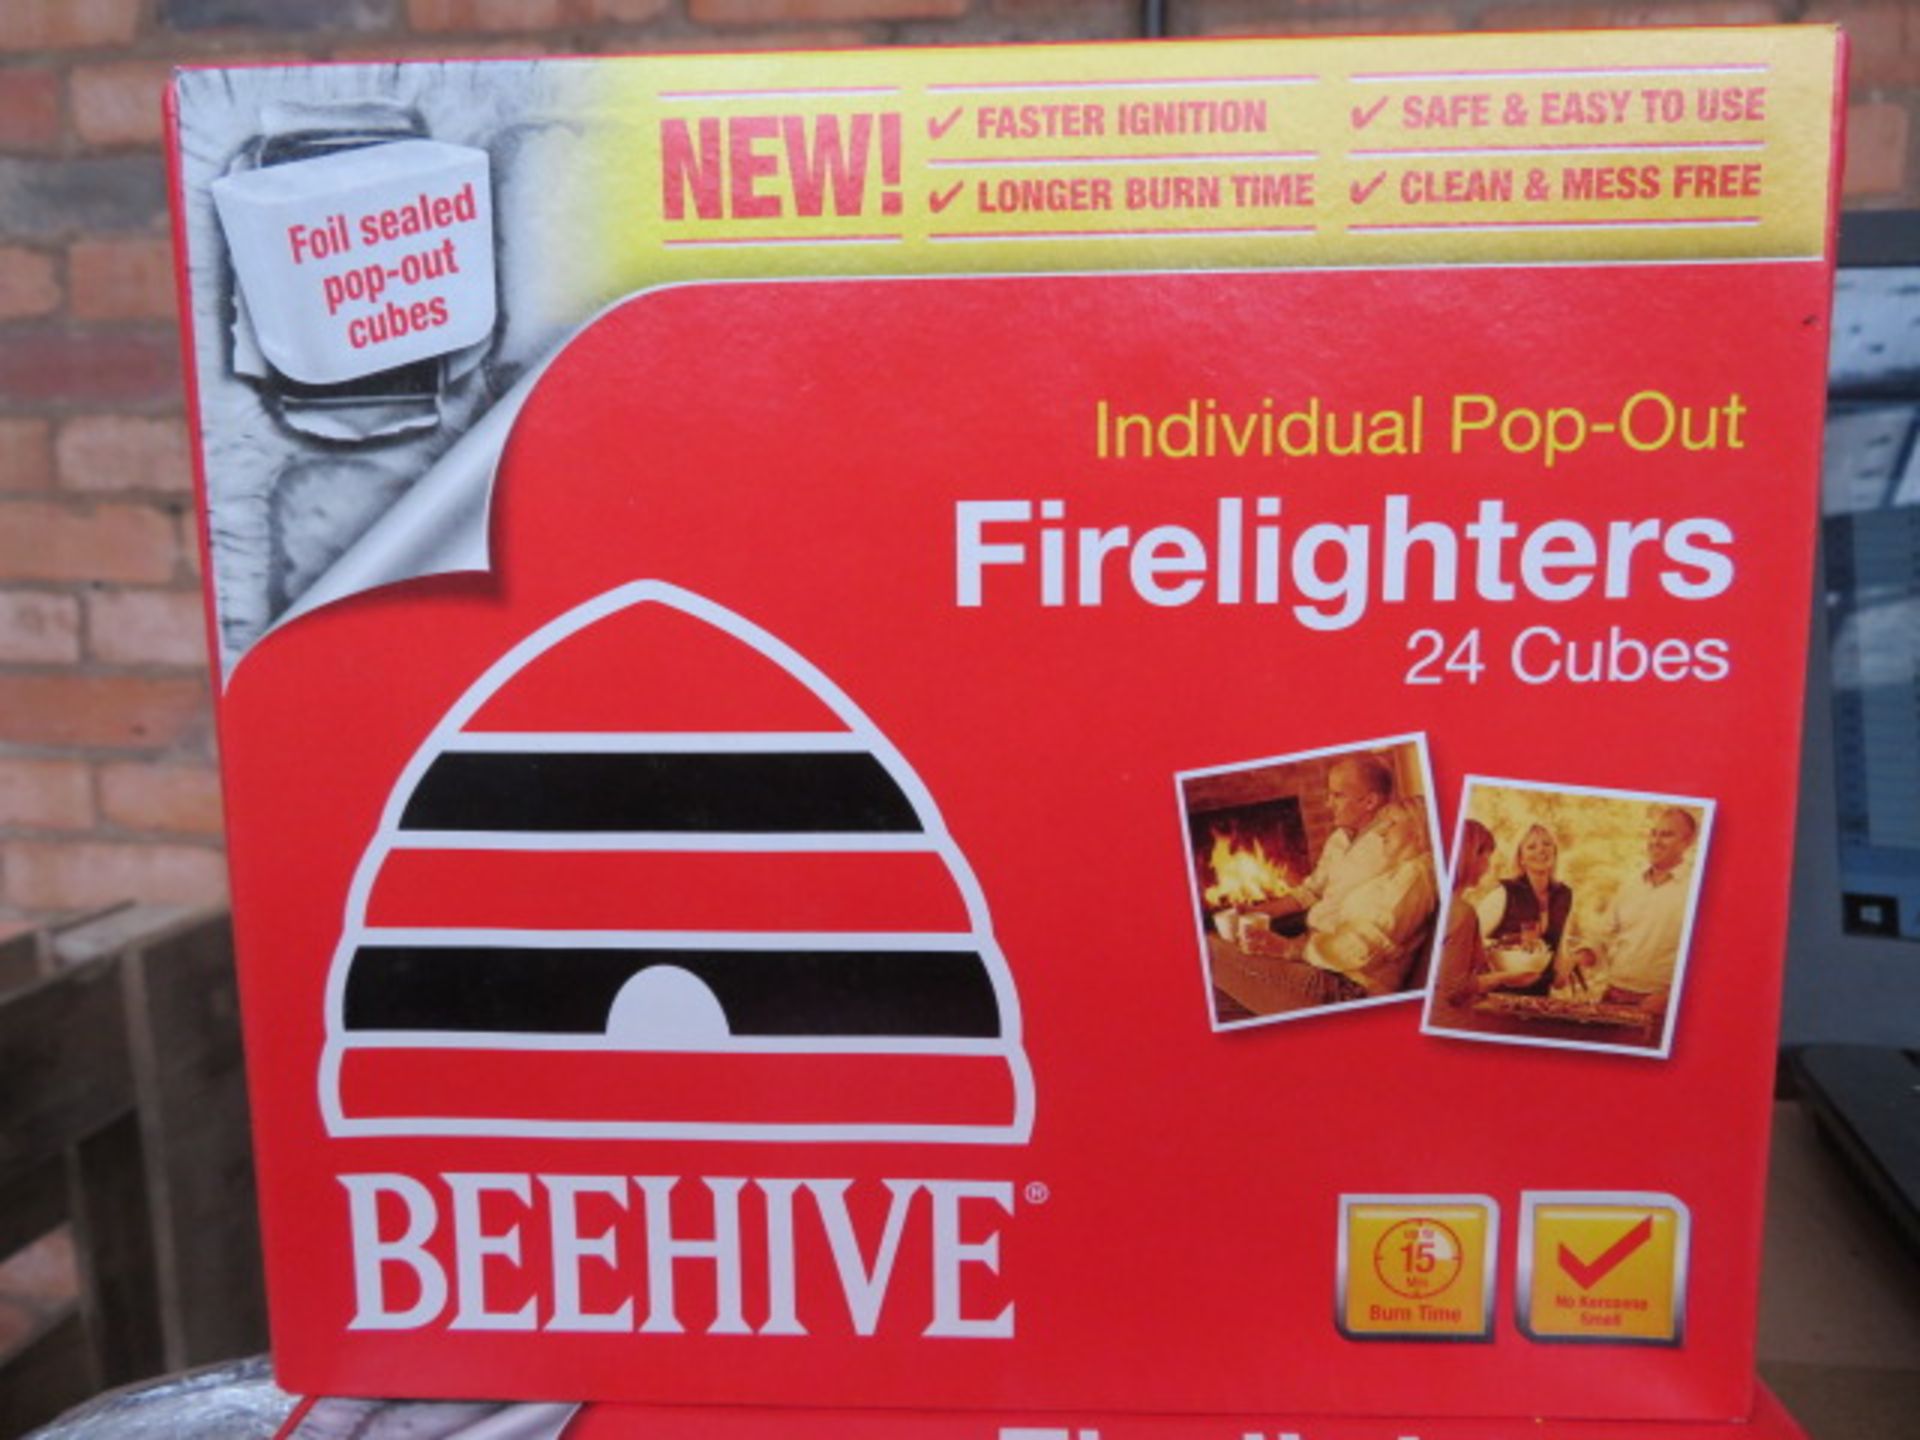 PALLET TO CONTAIN 400 x PACKS OF 24 BEEHIVE INDIVIDUAL POP-OUT (15 MINUTES BURN TIME). RRP £2....